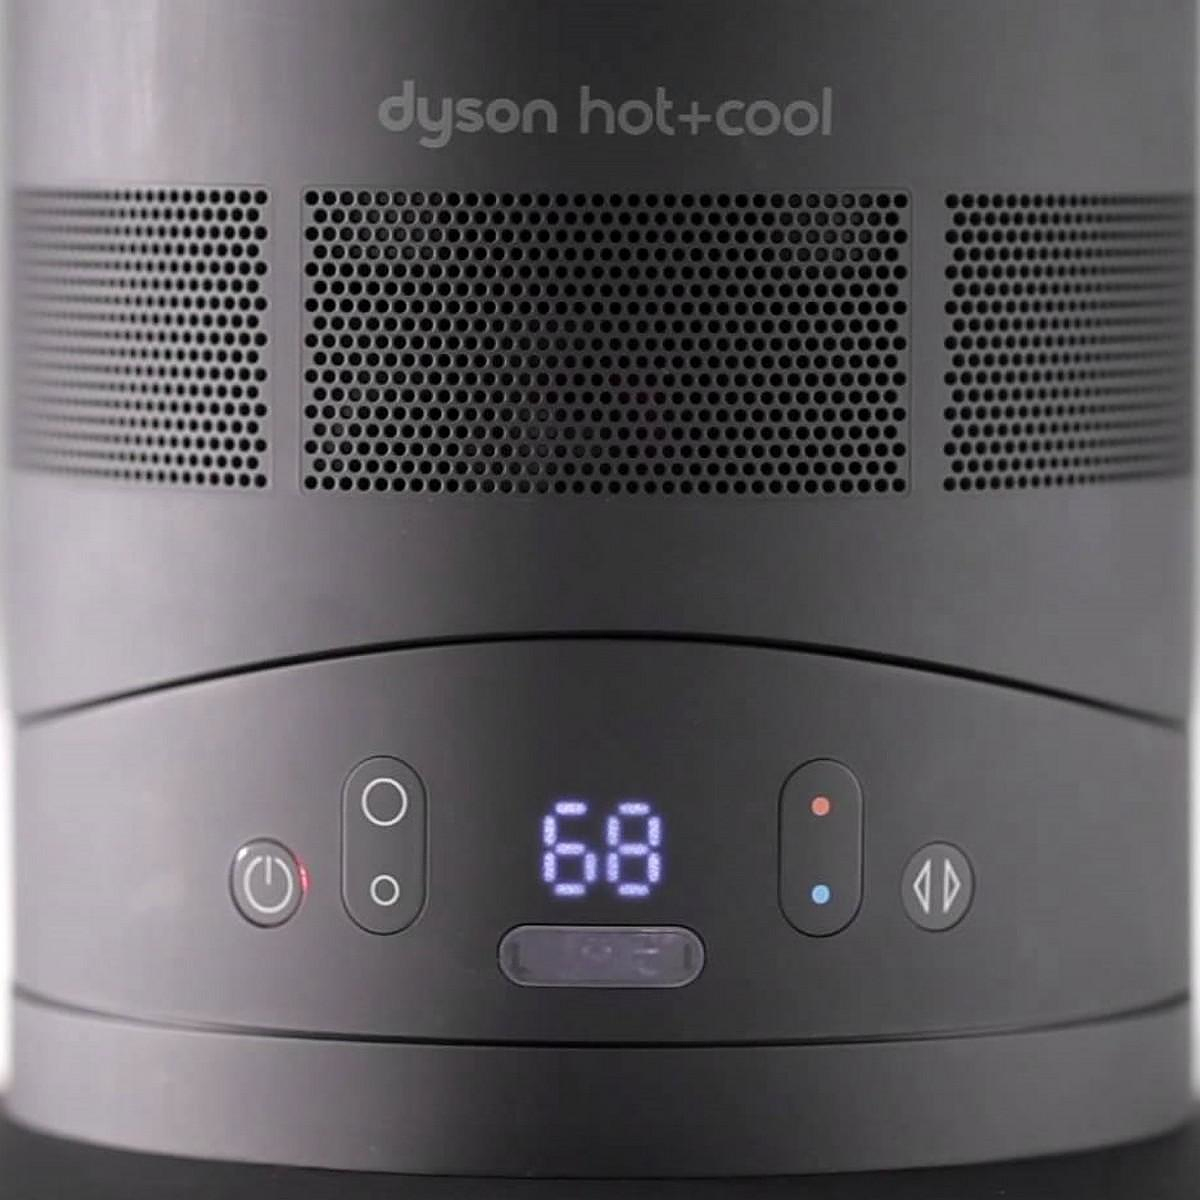 AM05 Hot + Cool Fan Heater by Dyson. - Design Is This